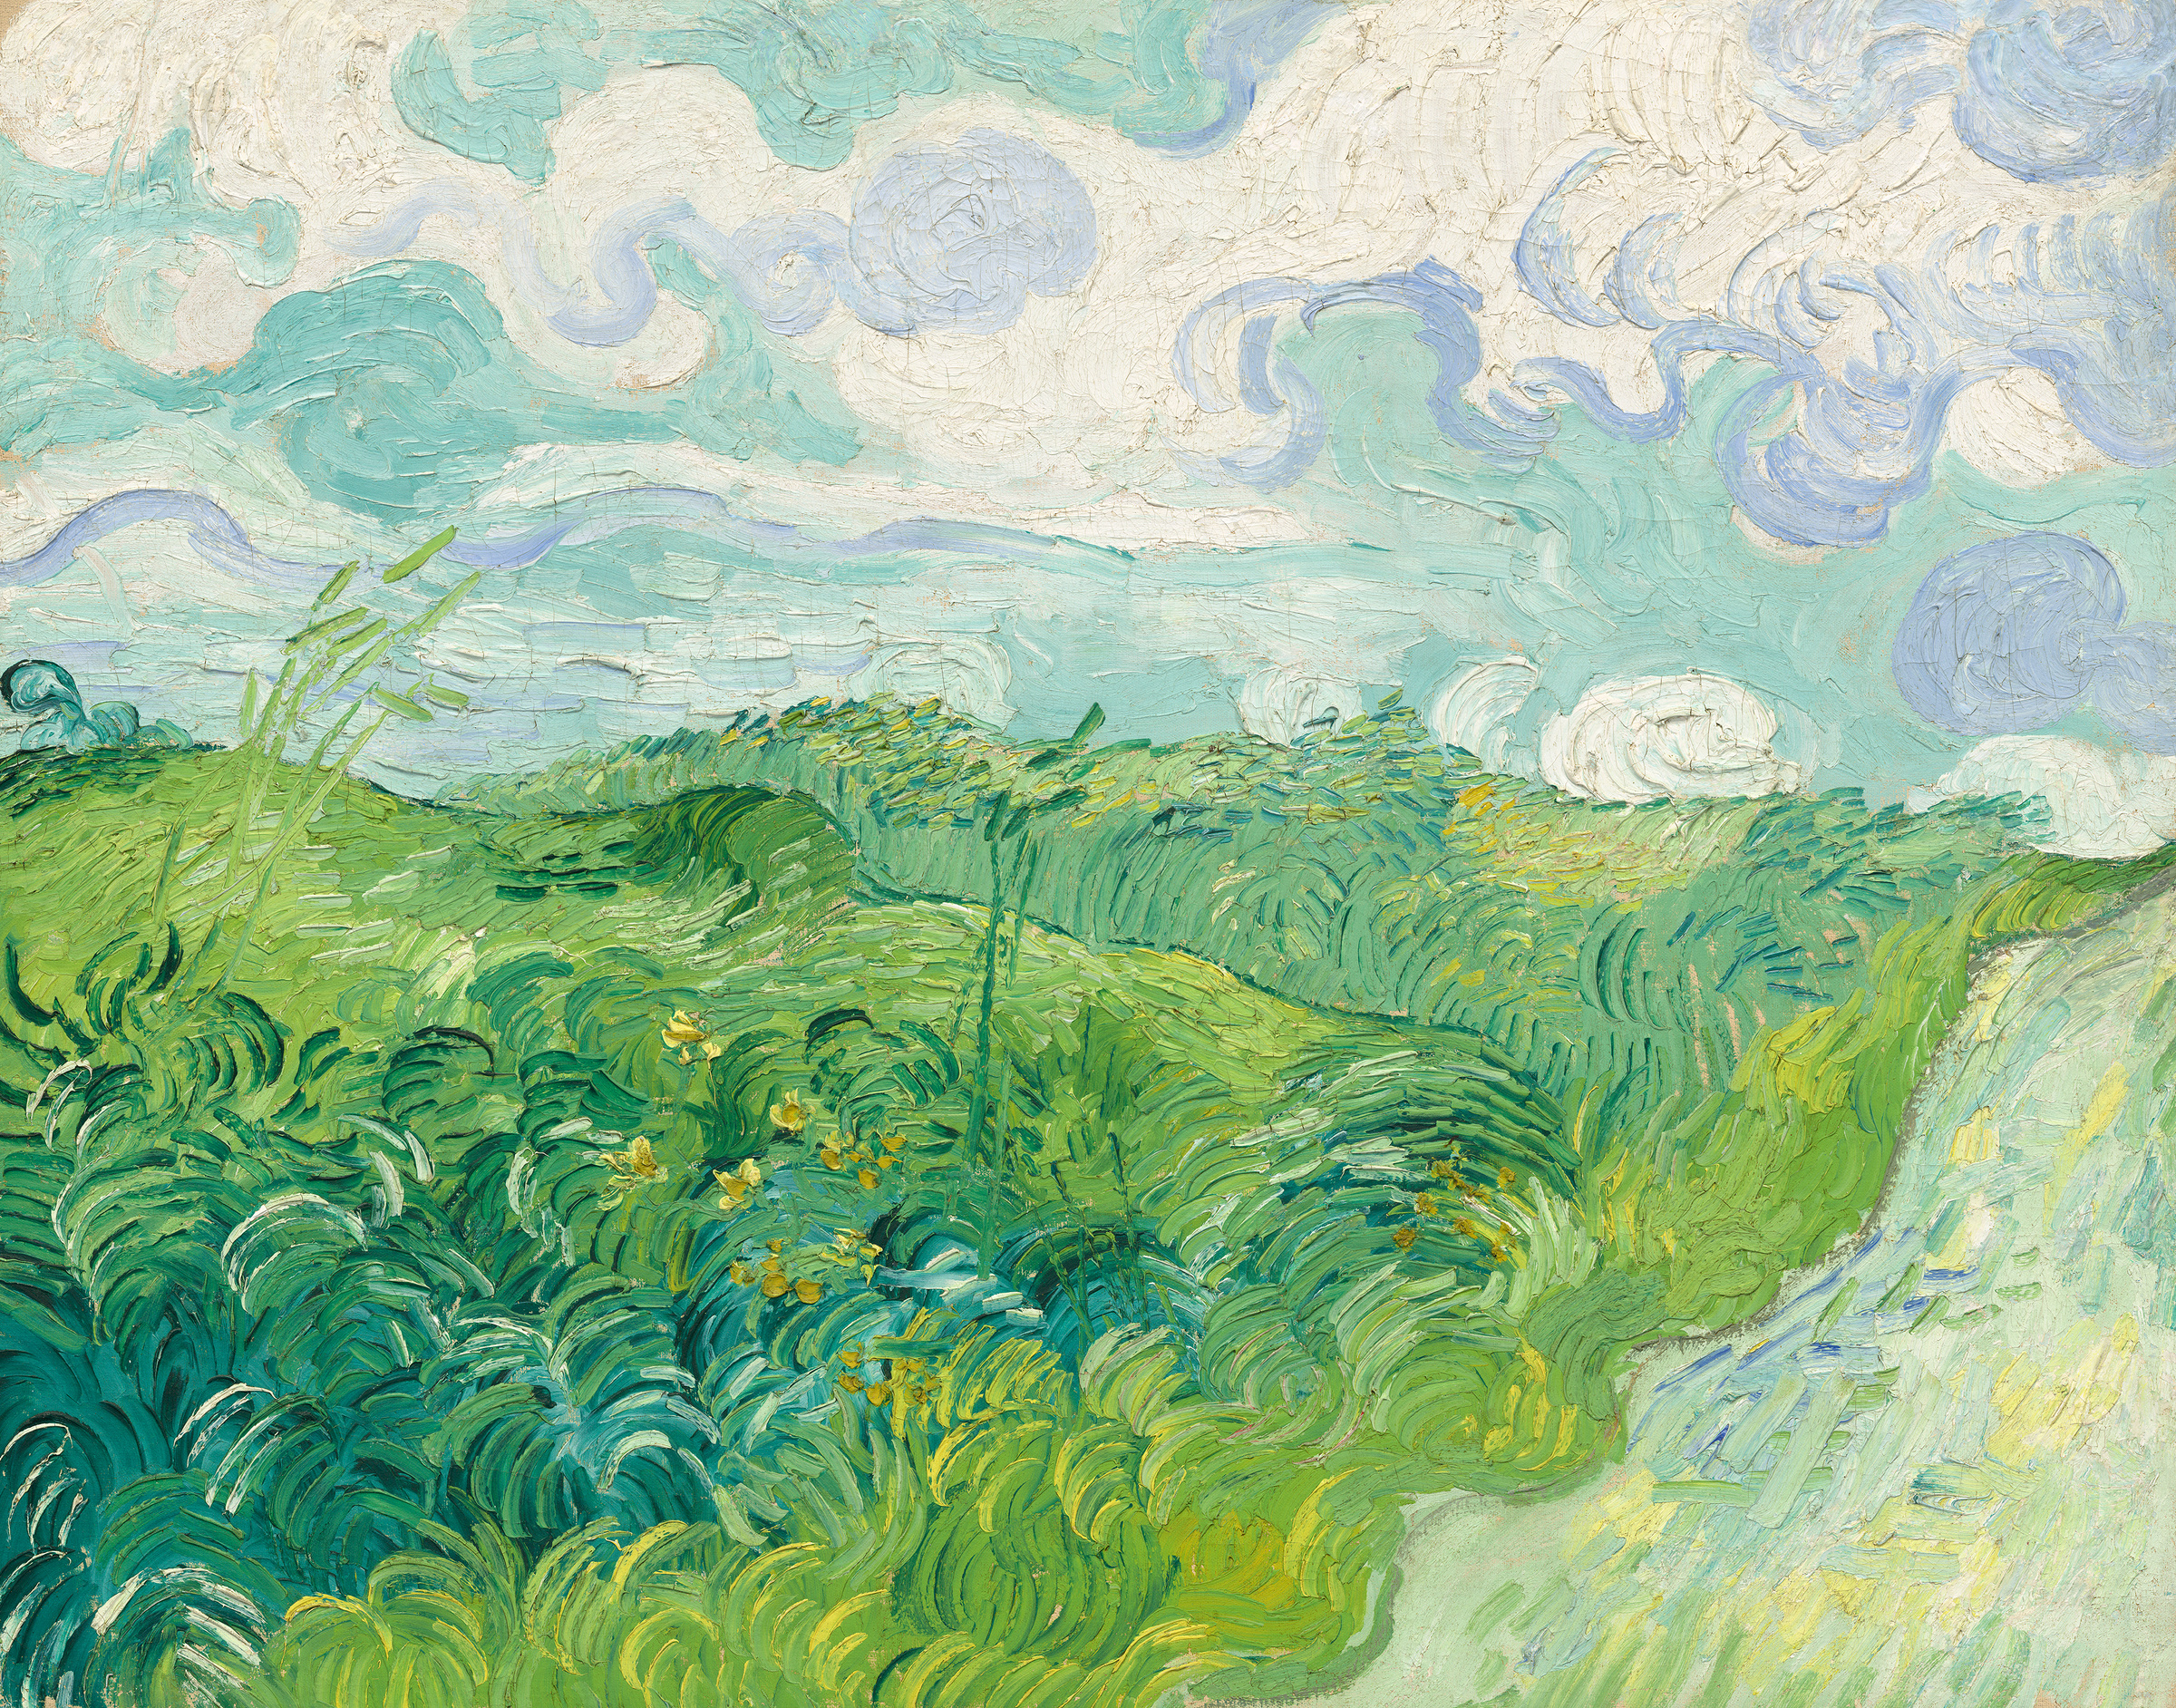 Green Wheat Fields, Auvers by Vincent Van Gogh, 1890. Courtesy of National Gallery of Art, Washington.